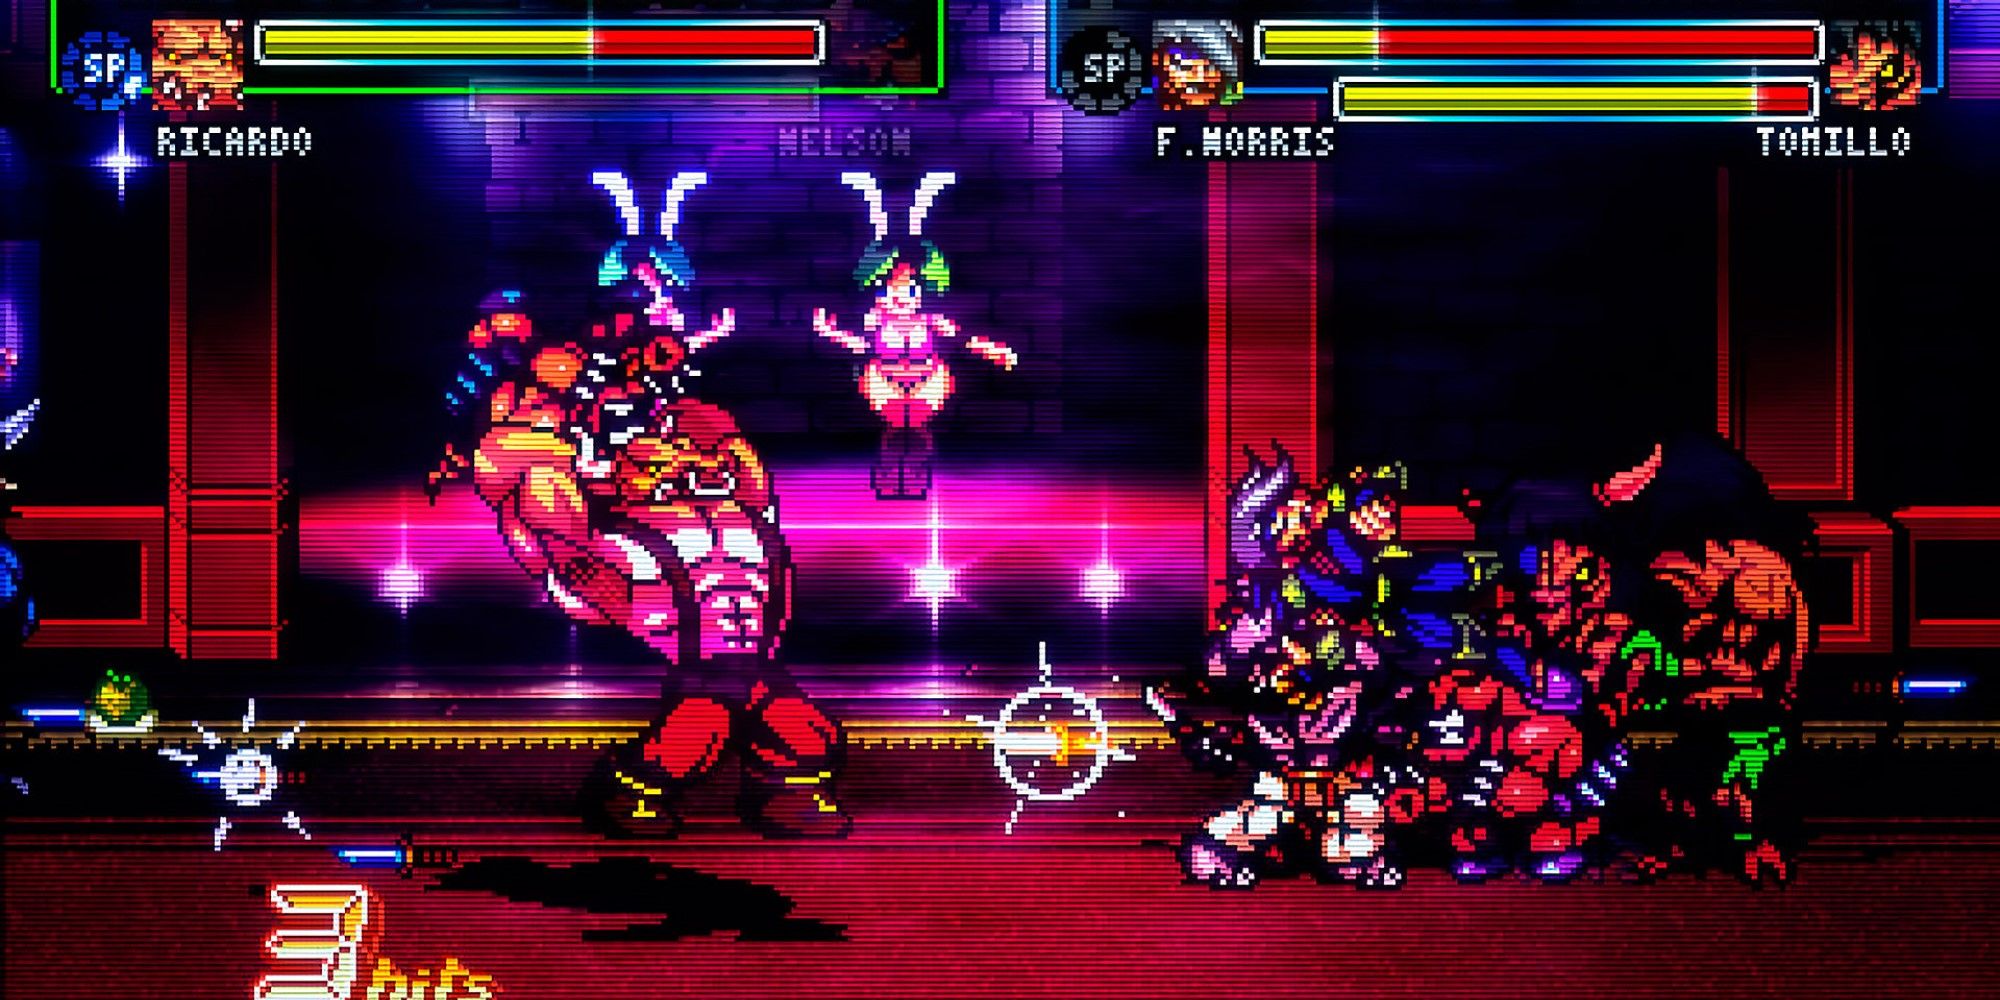 fight n rage, Ricardo brawls with characters